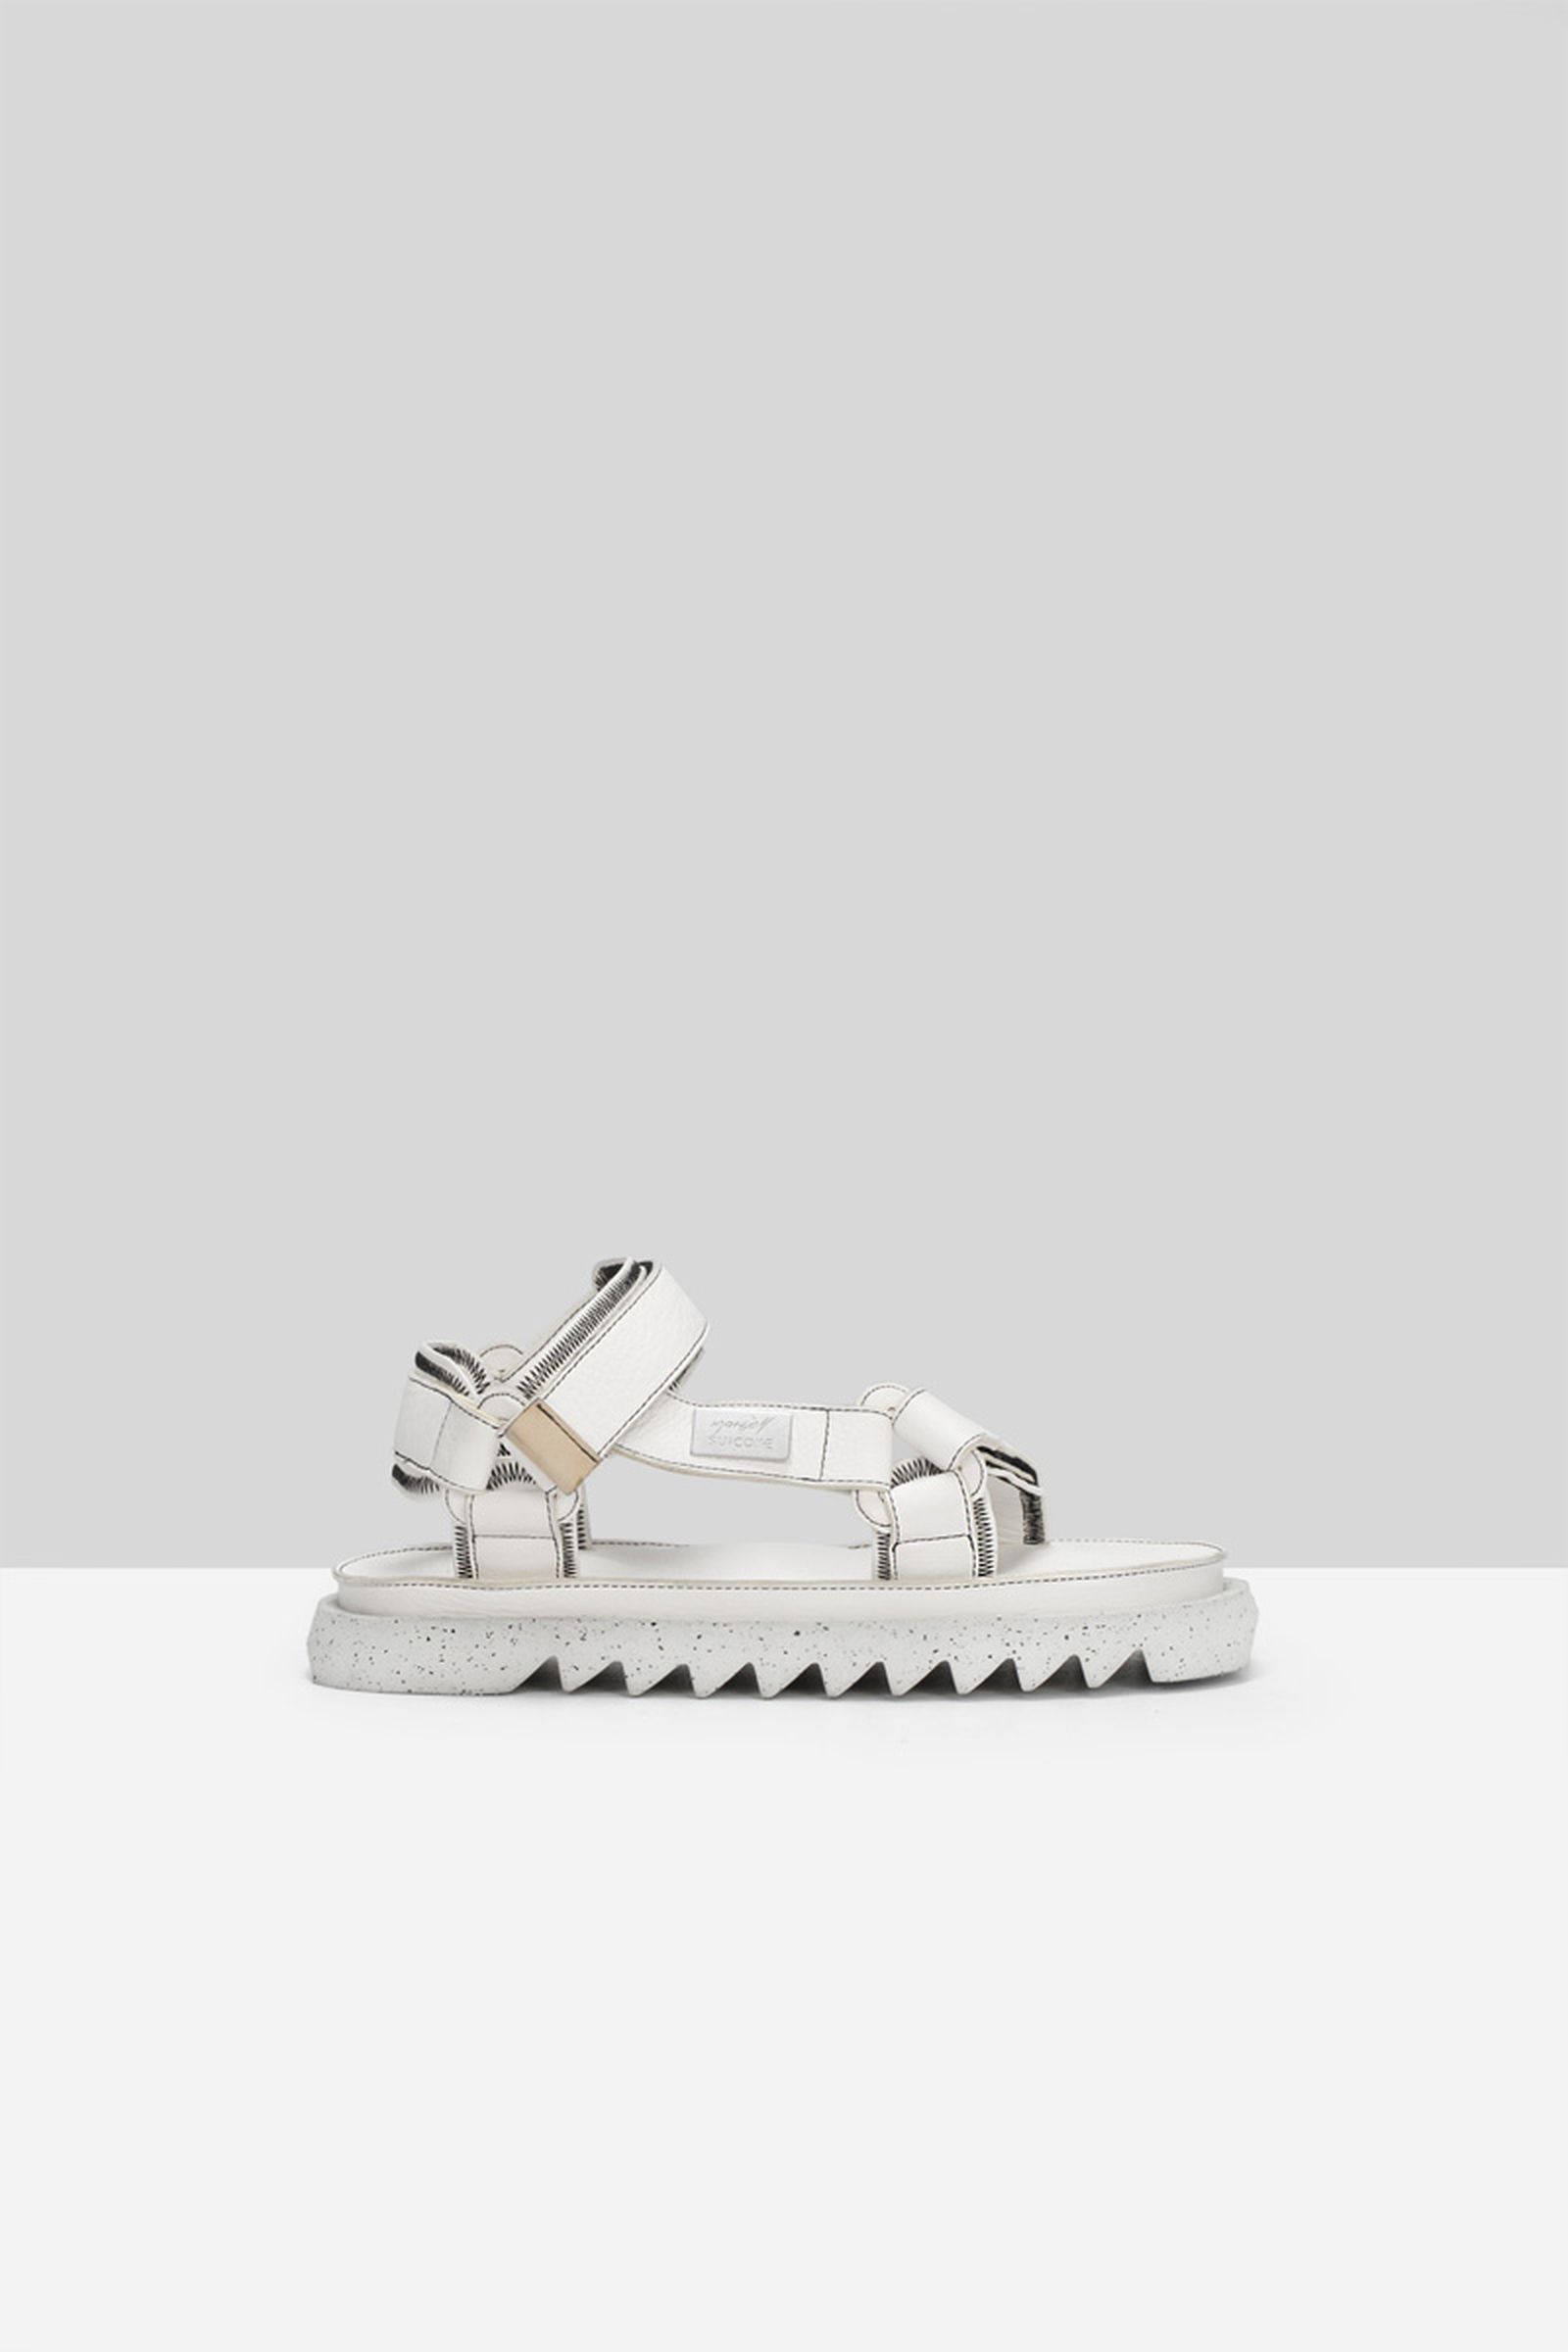 marsell-suicoke-ss21-collection-release-date-price-1